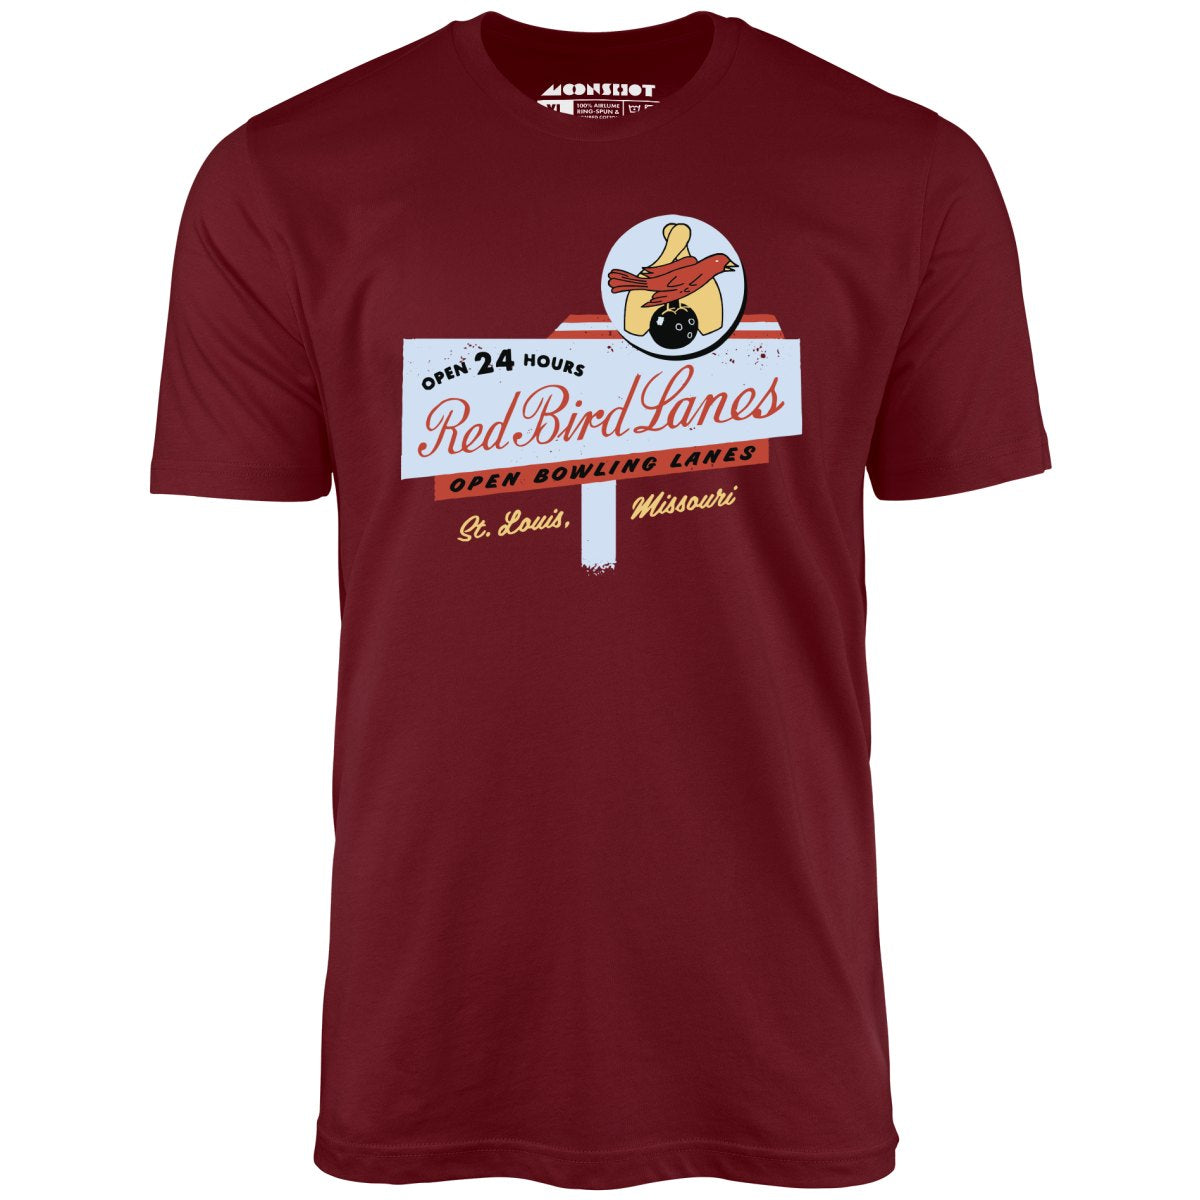 Red Bird Lanes v2 - St. Louis, MO - Vintage Bowling Alley - Unisex T-Shirt